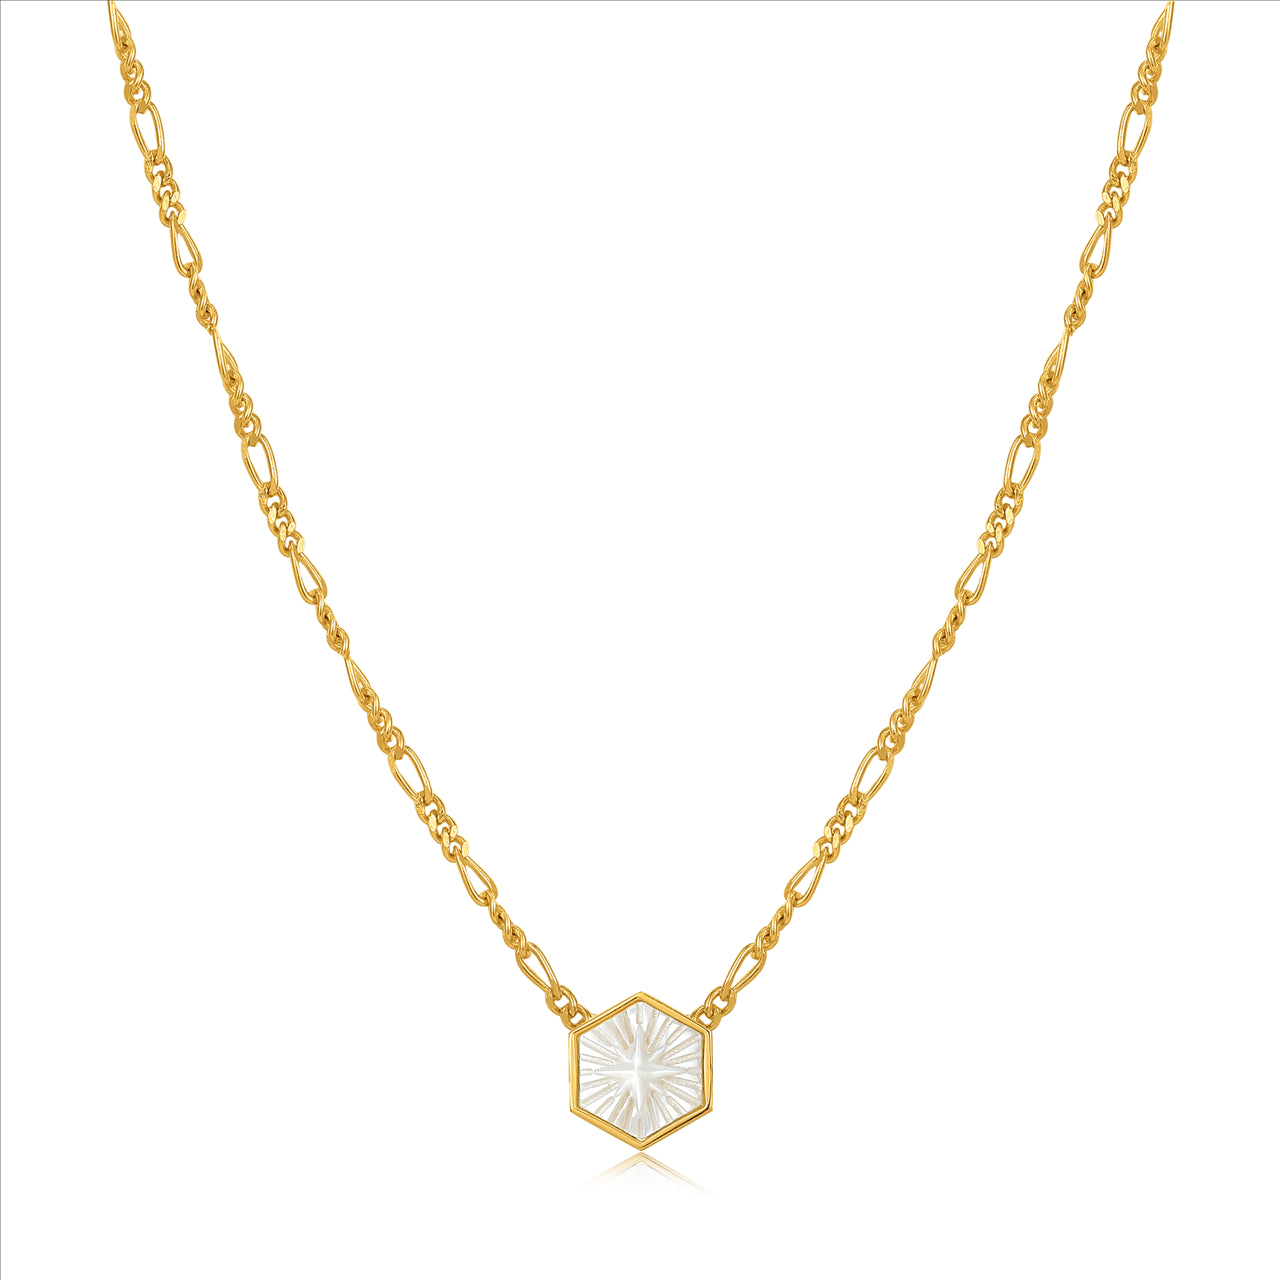 Ania Haie Compass Emblem Gold Figaro Chain Necklace